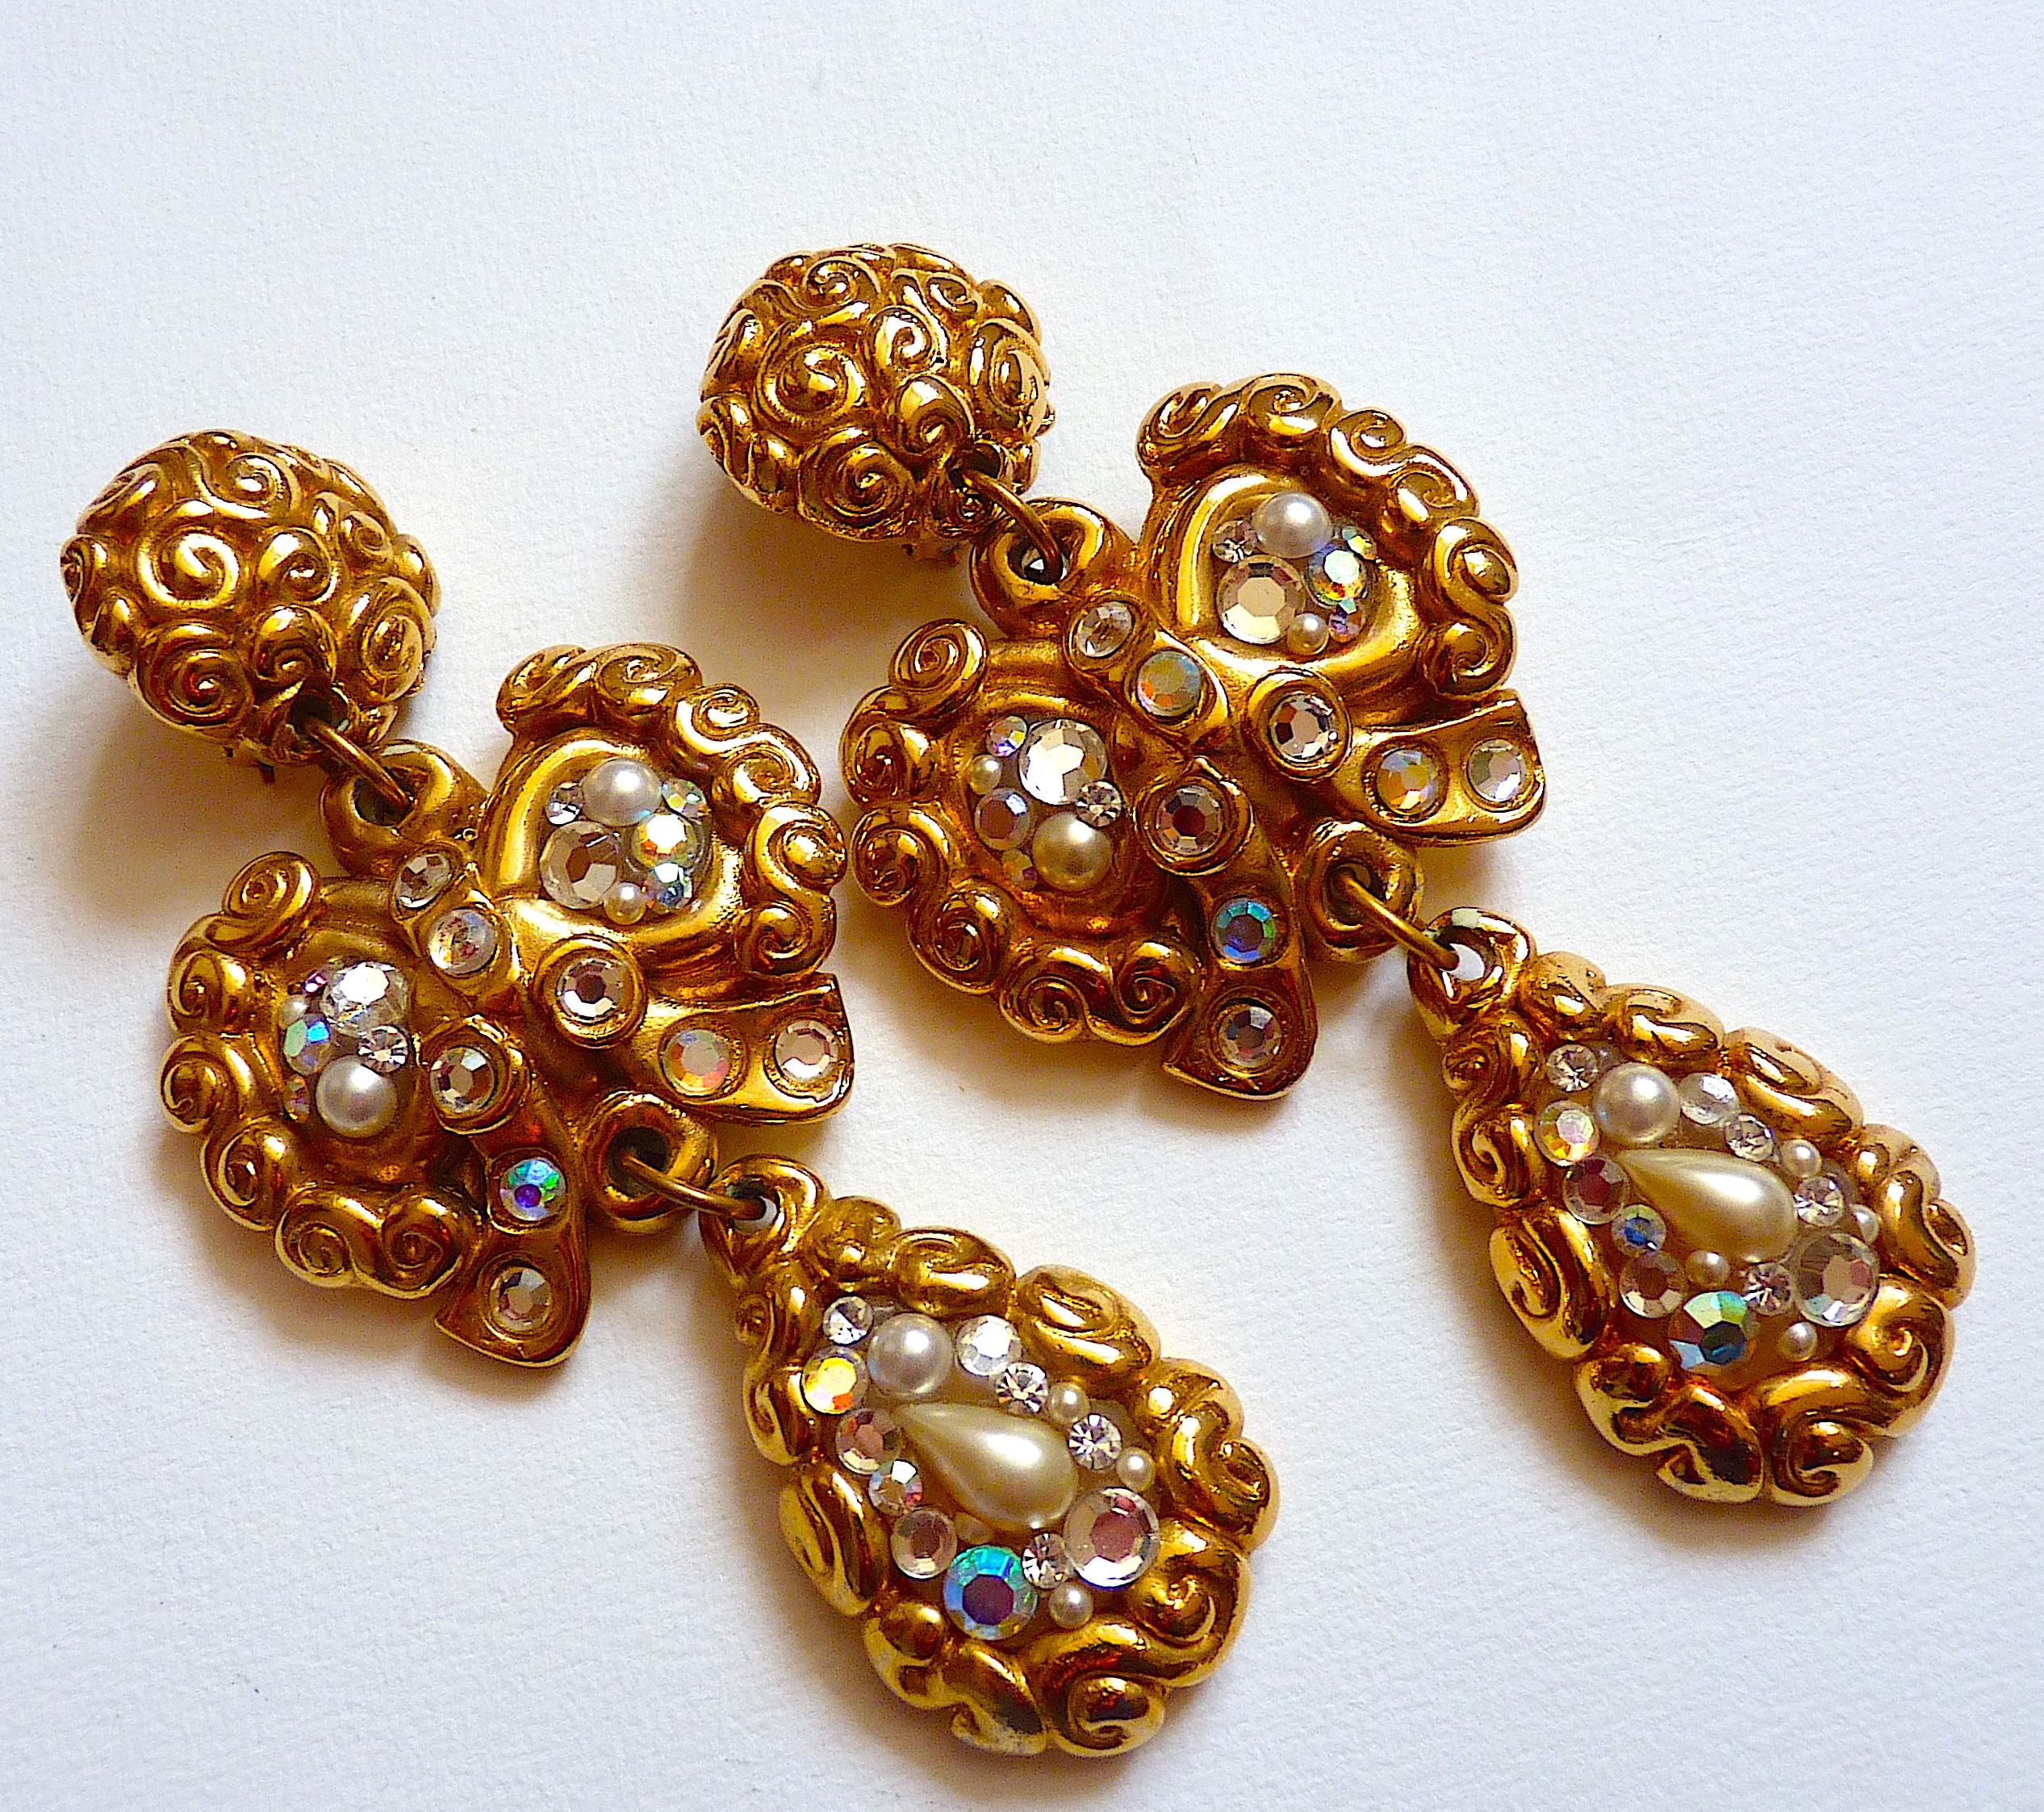 JACKY DE G PARIS Oversized Drop clip on Earrings, gold tone resin and AB rhinestones and white pearls, Vintage from the 1980s.

Signed Jacky de G Made in France at back of each drop.

This is a highly collectible French Costume Jewelry Masterpiece